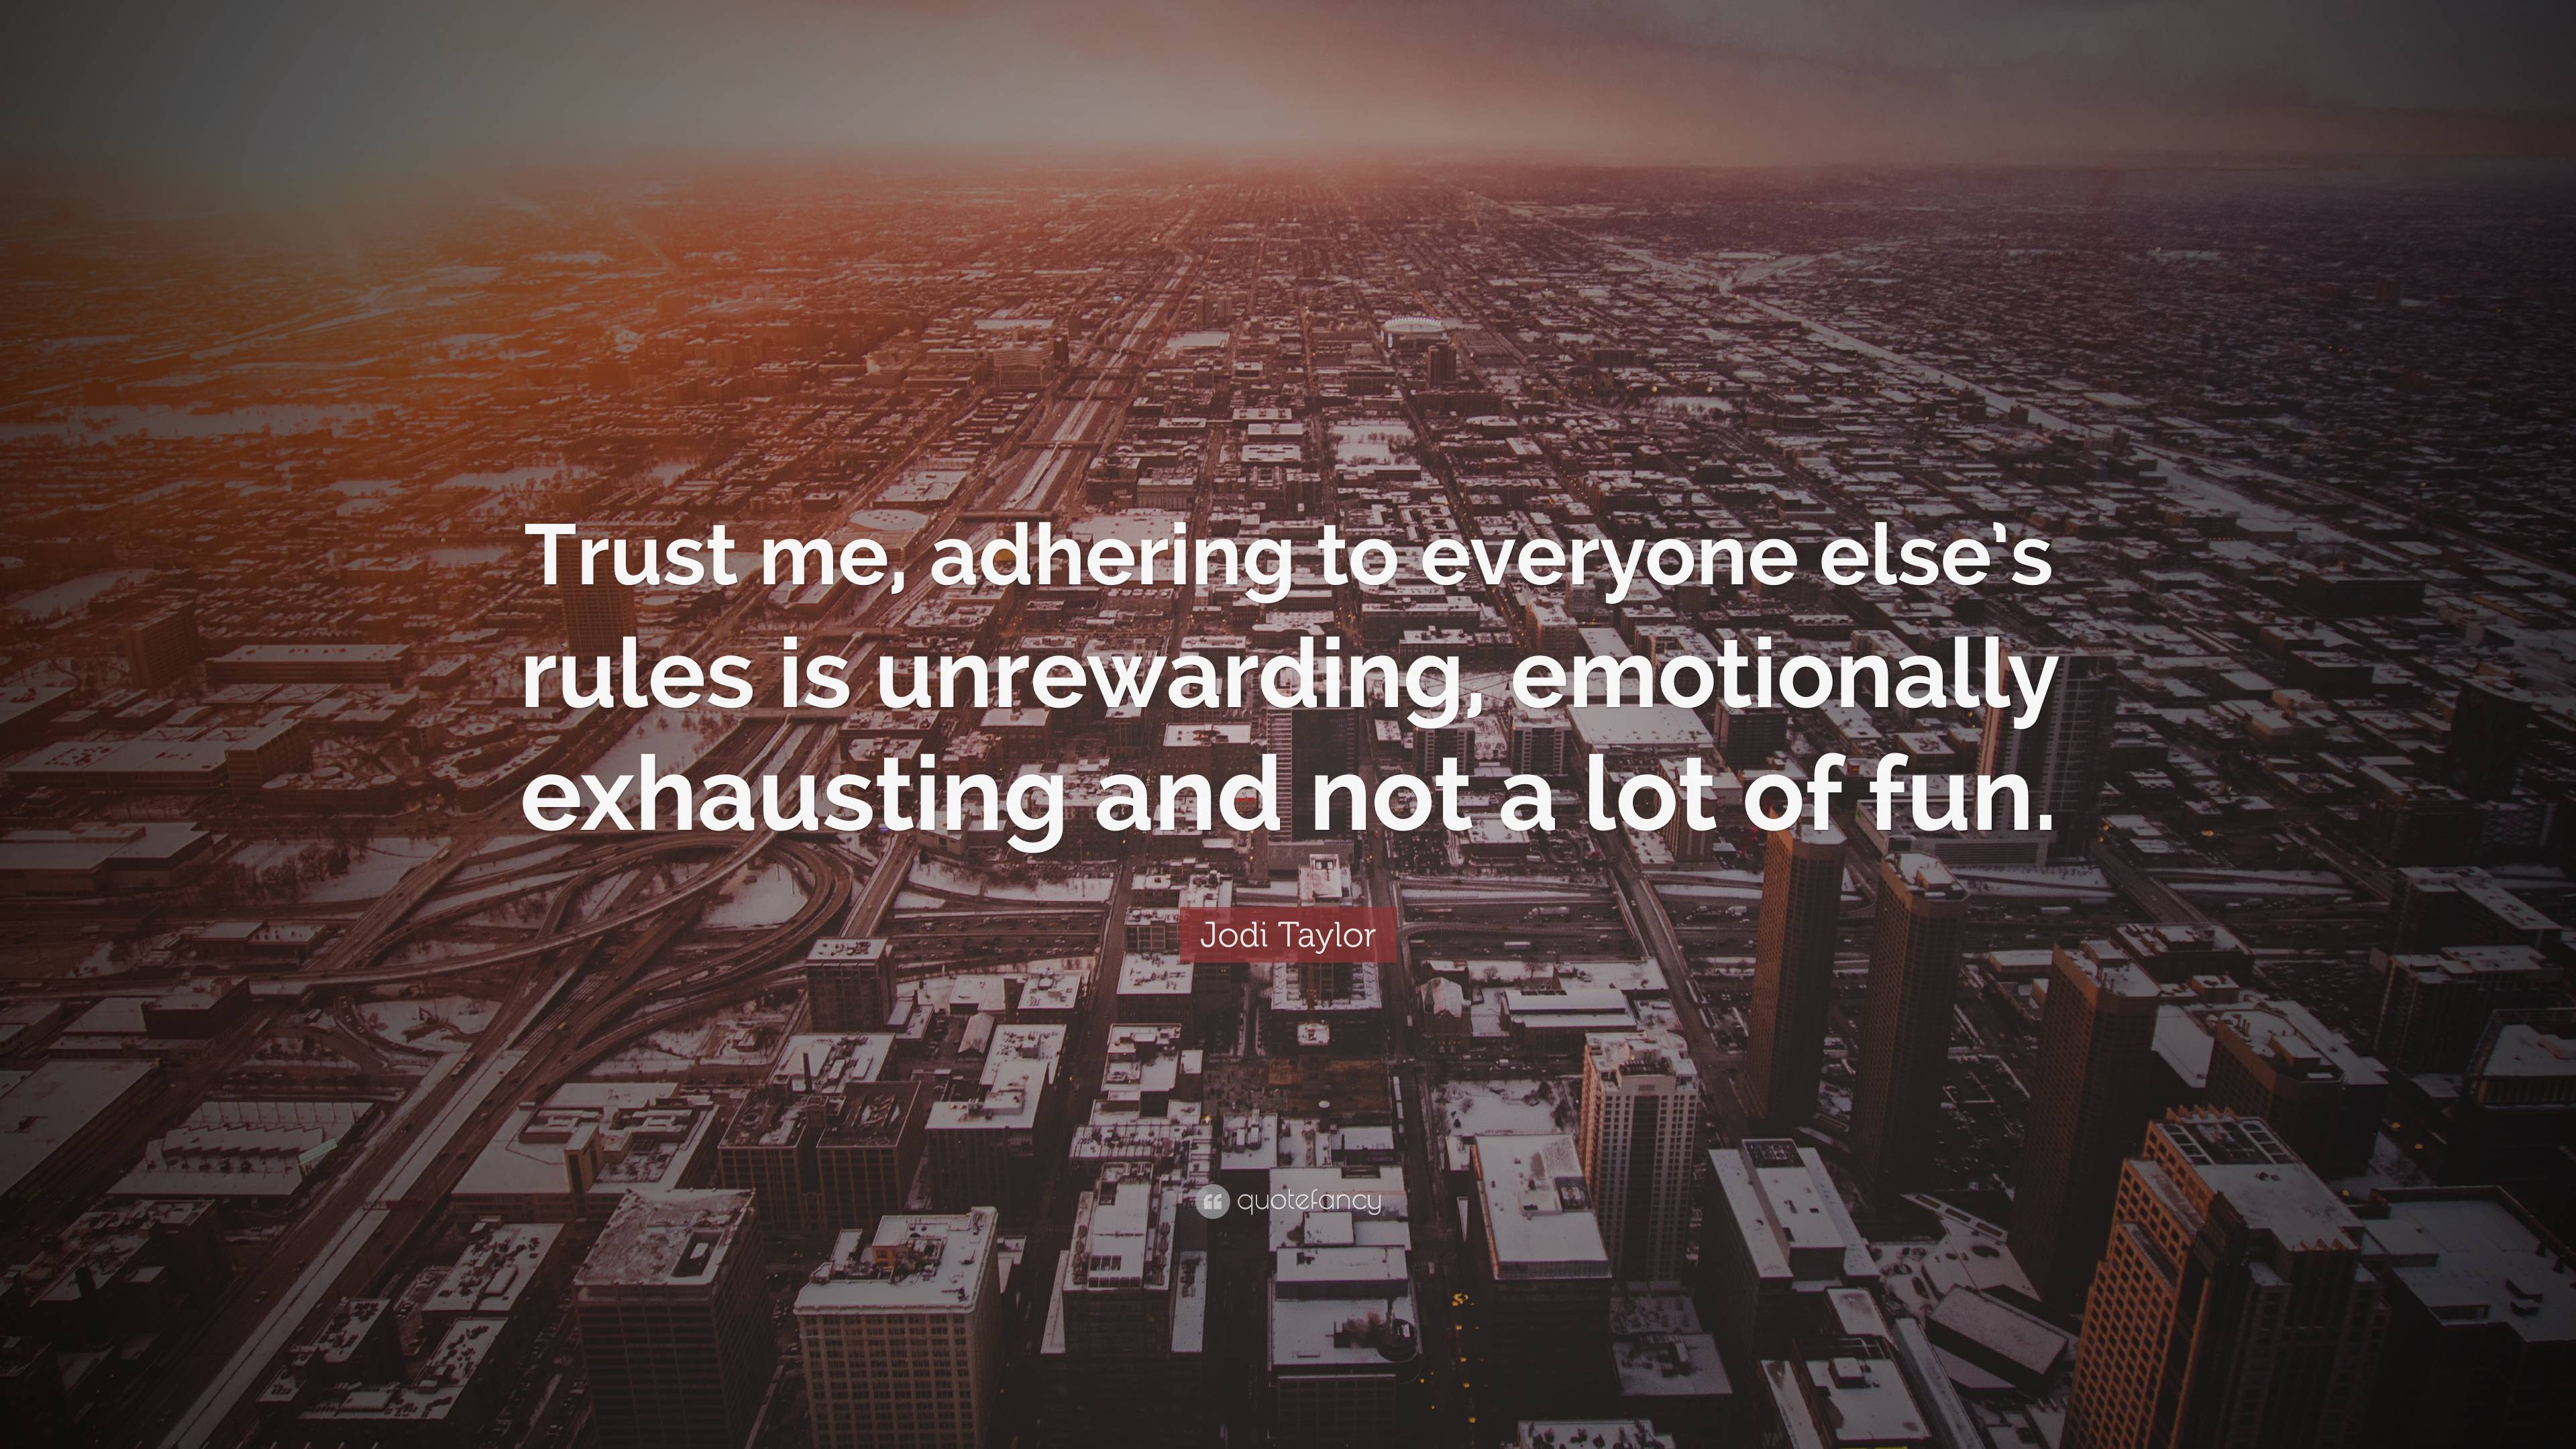 Jodi Taylor Quote: “Trust me, adhering to everyone else's rules is  unrewarding, emotionally exhausting and not